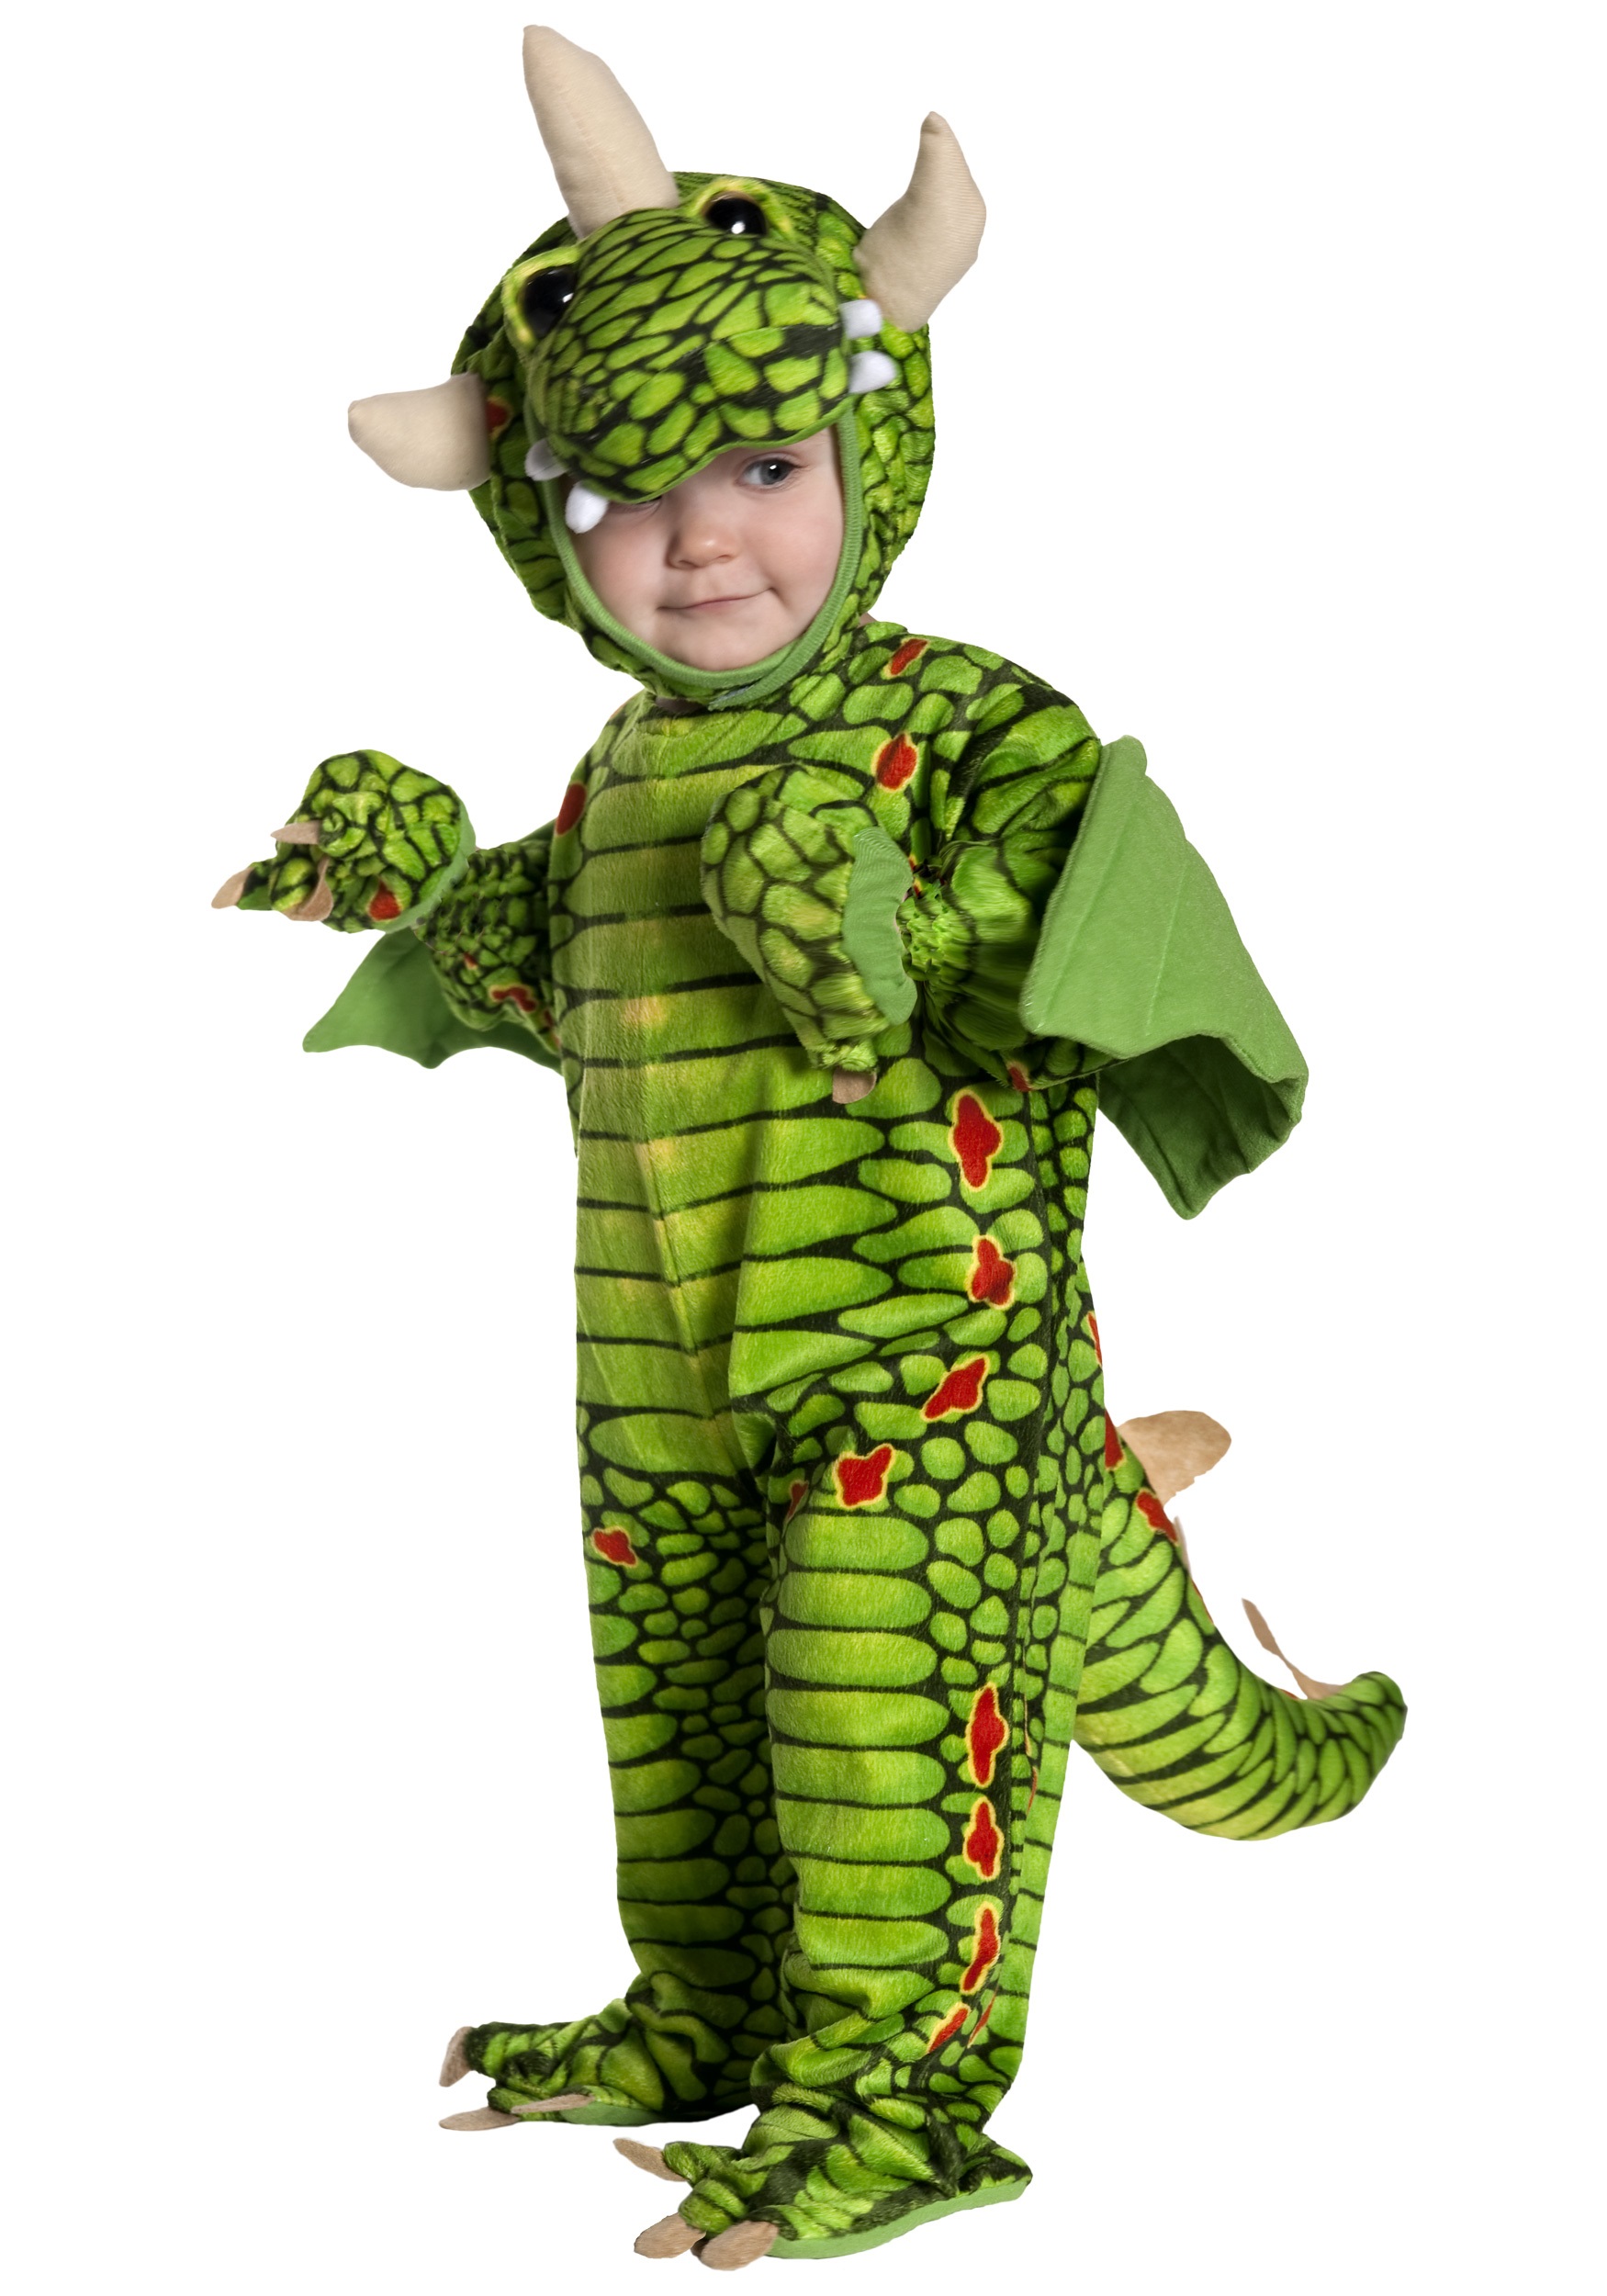 Photos - Fancy Dress Toddler Underwraps Medieval Dragon Costume for Toddlers Green UN26020 